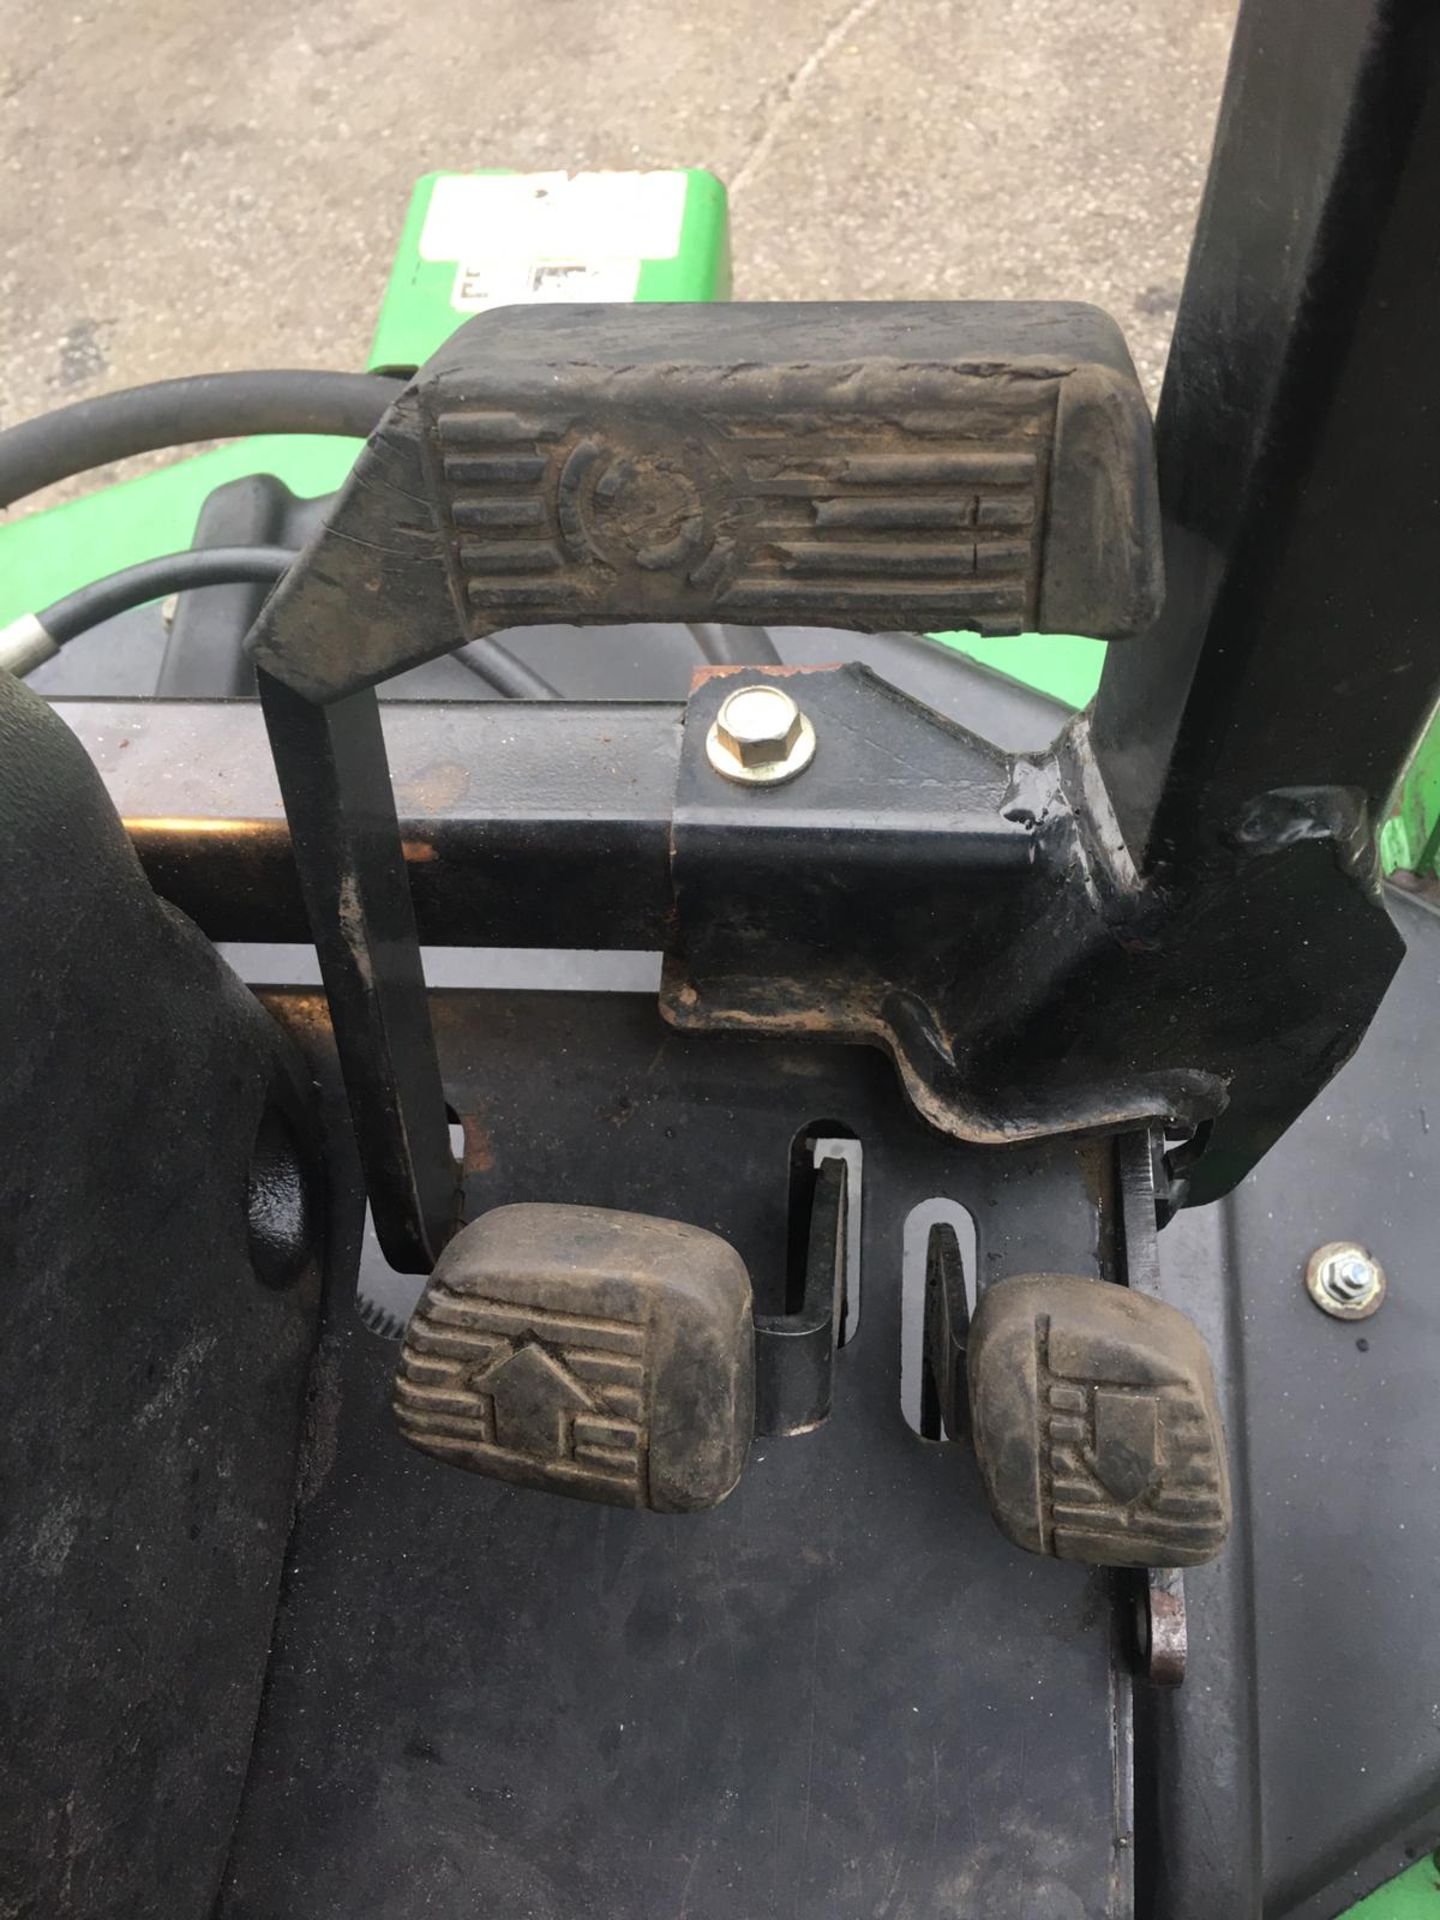 JOHN DEERE 1600 WIDE AREA TURBO BATWING RIDE ON LAWN MOWER, CRUISE CONTROL, RUNS & WORKS *NO VAT* - Image 17 of 24